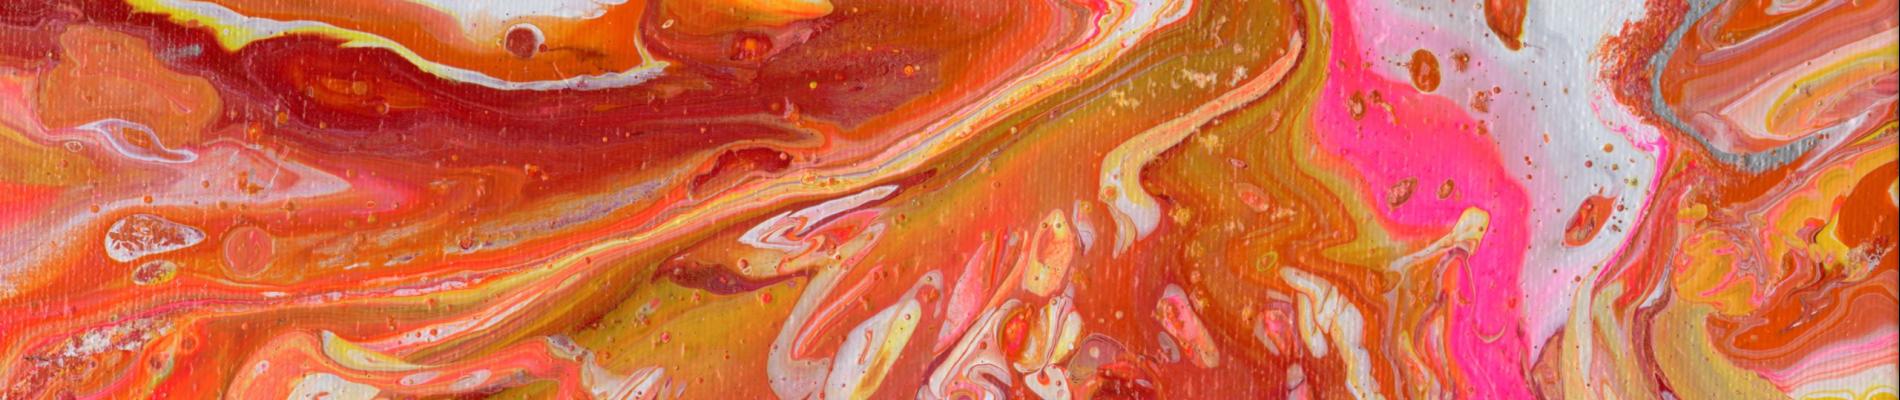 New! Dynamic Designs in Acrylic Pour Art